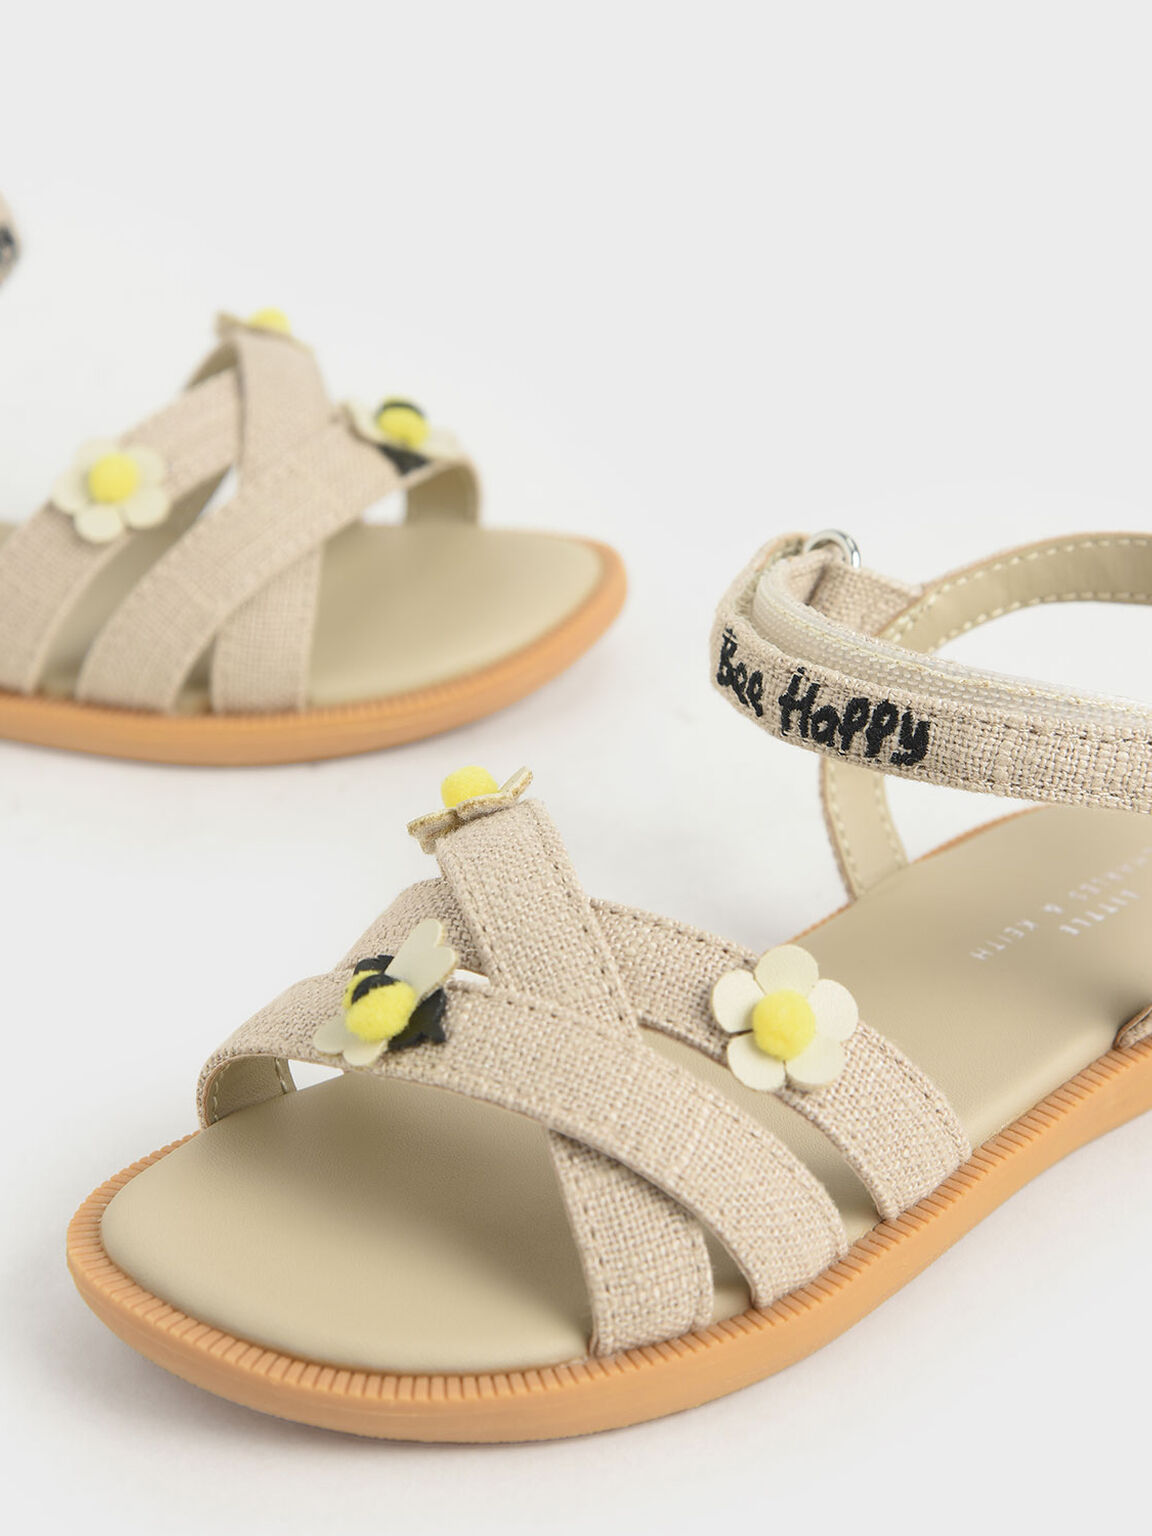 The Purpose Collection - Girls' Bee Flat Sandals, Beige, hi-res